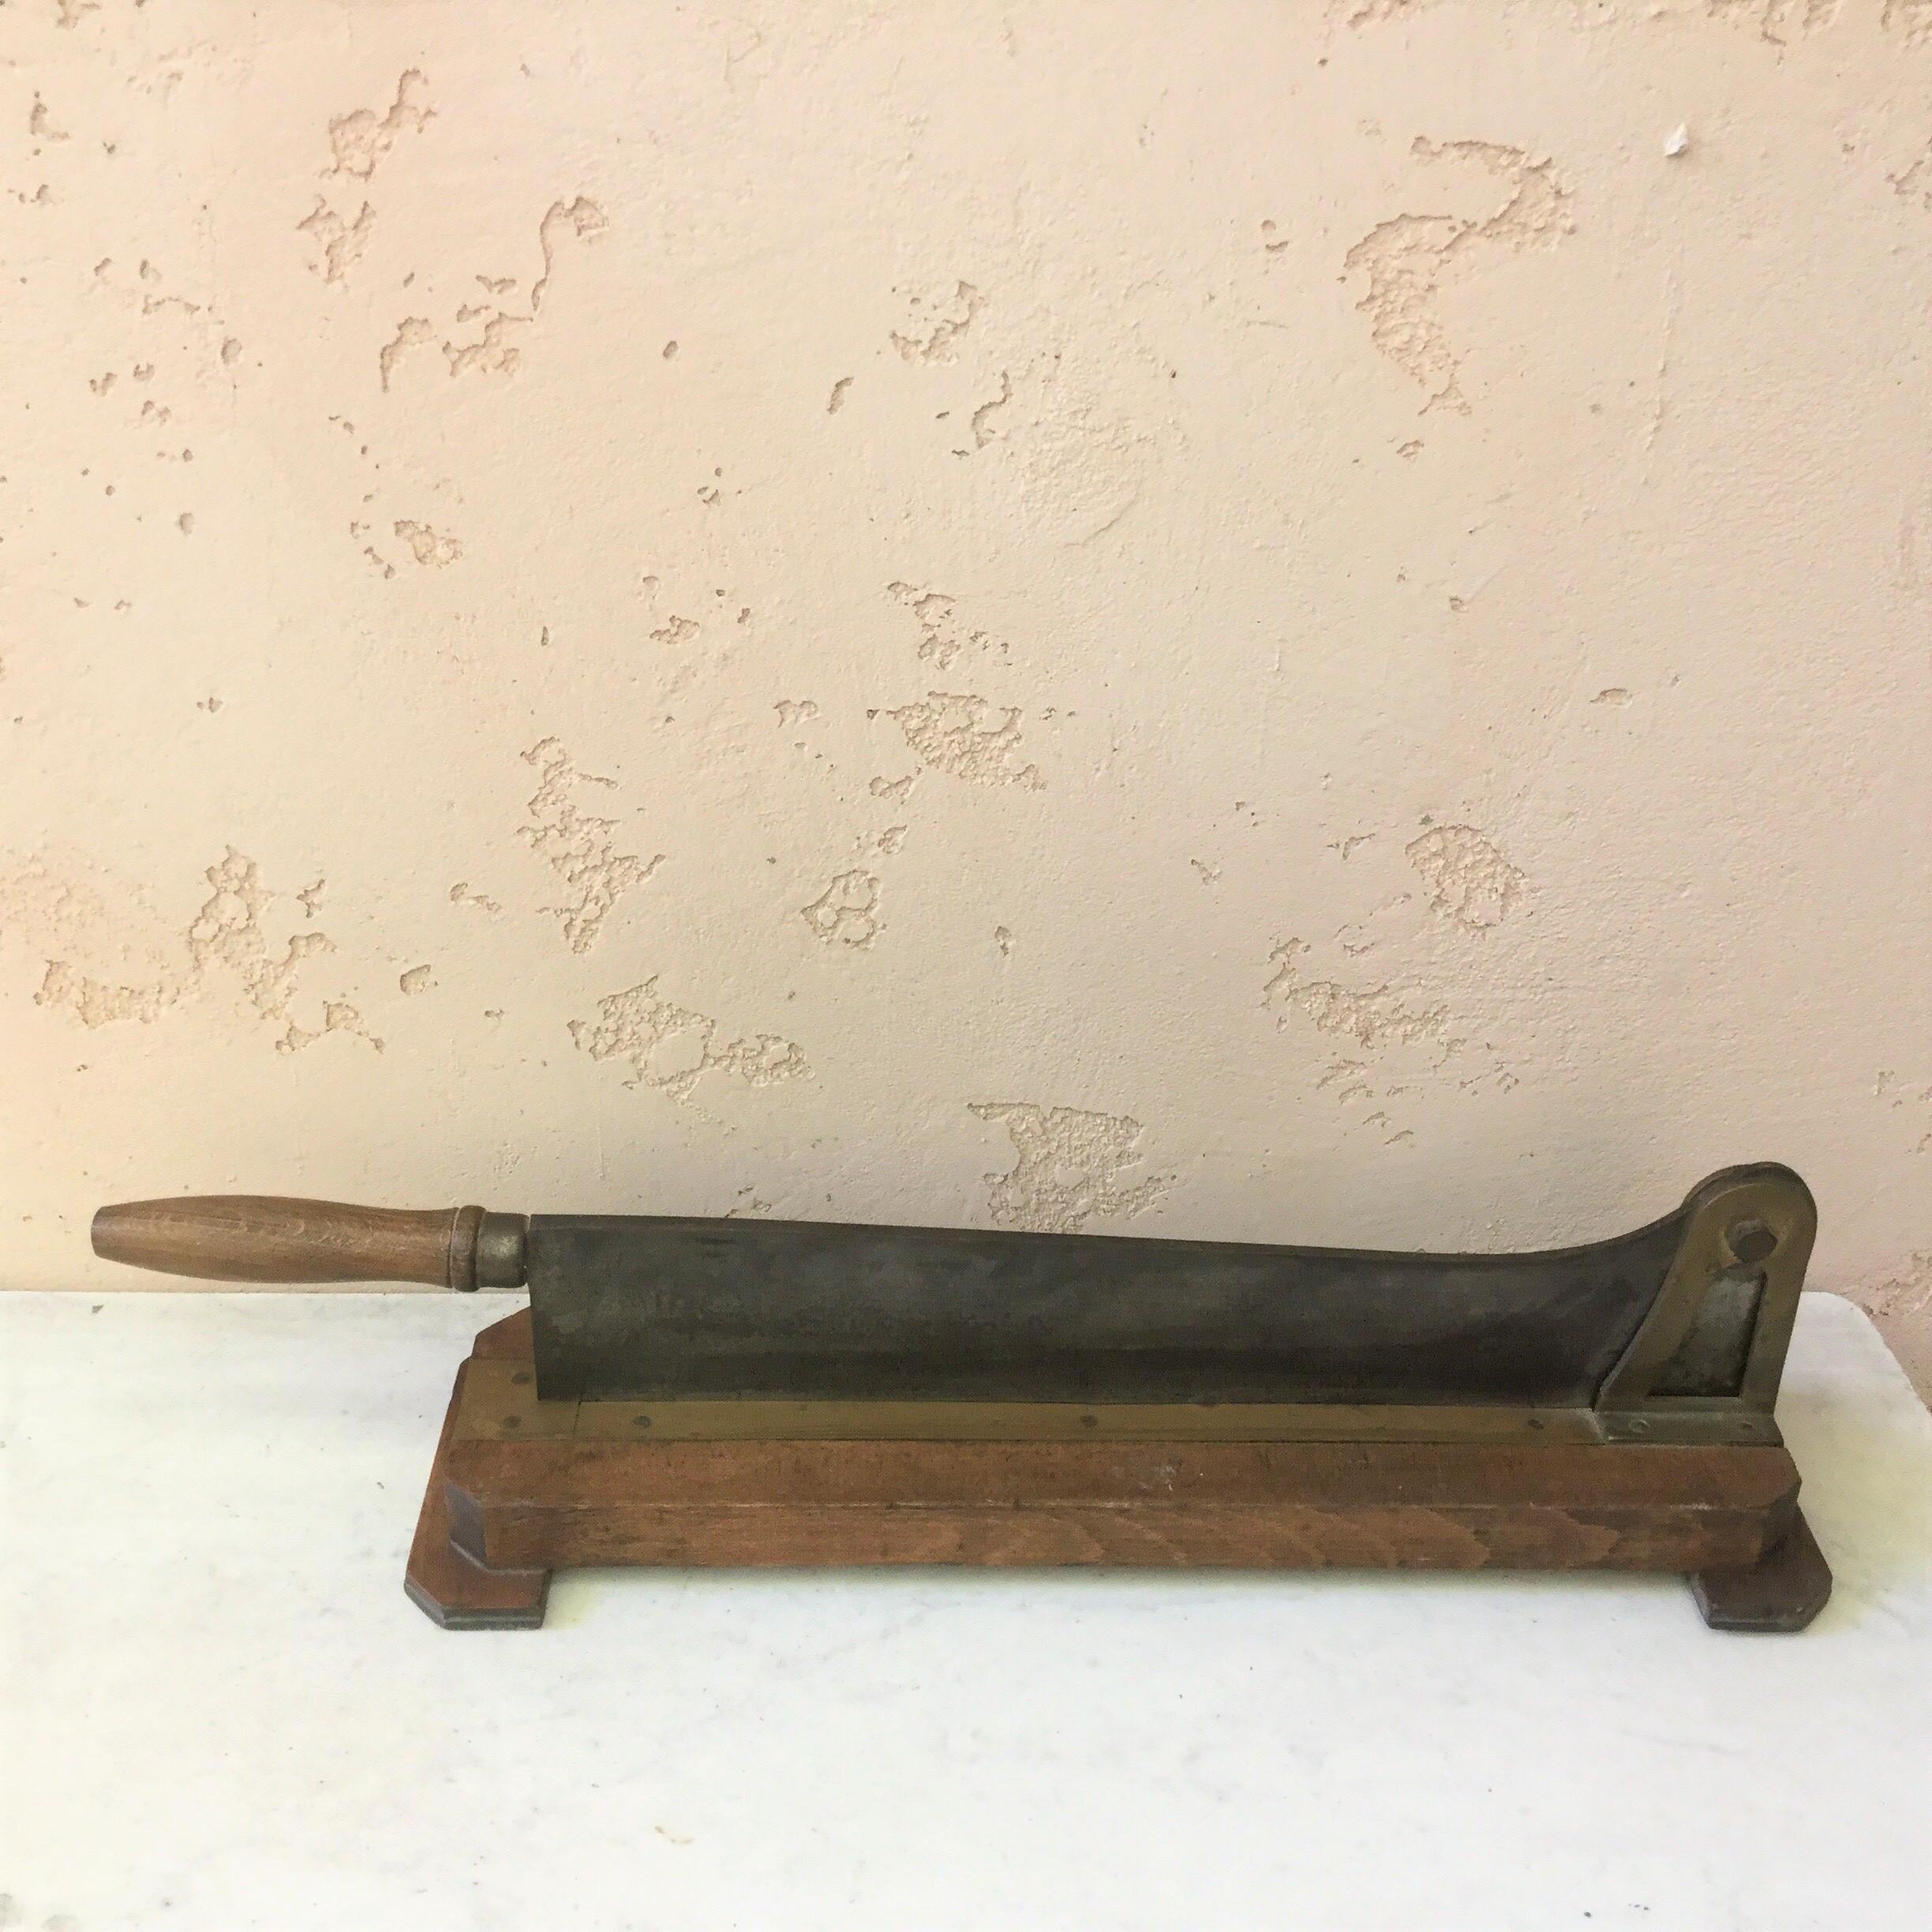 Copper French Wood and Iron Bakery Bread Cutter, circa 1900